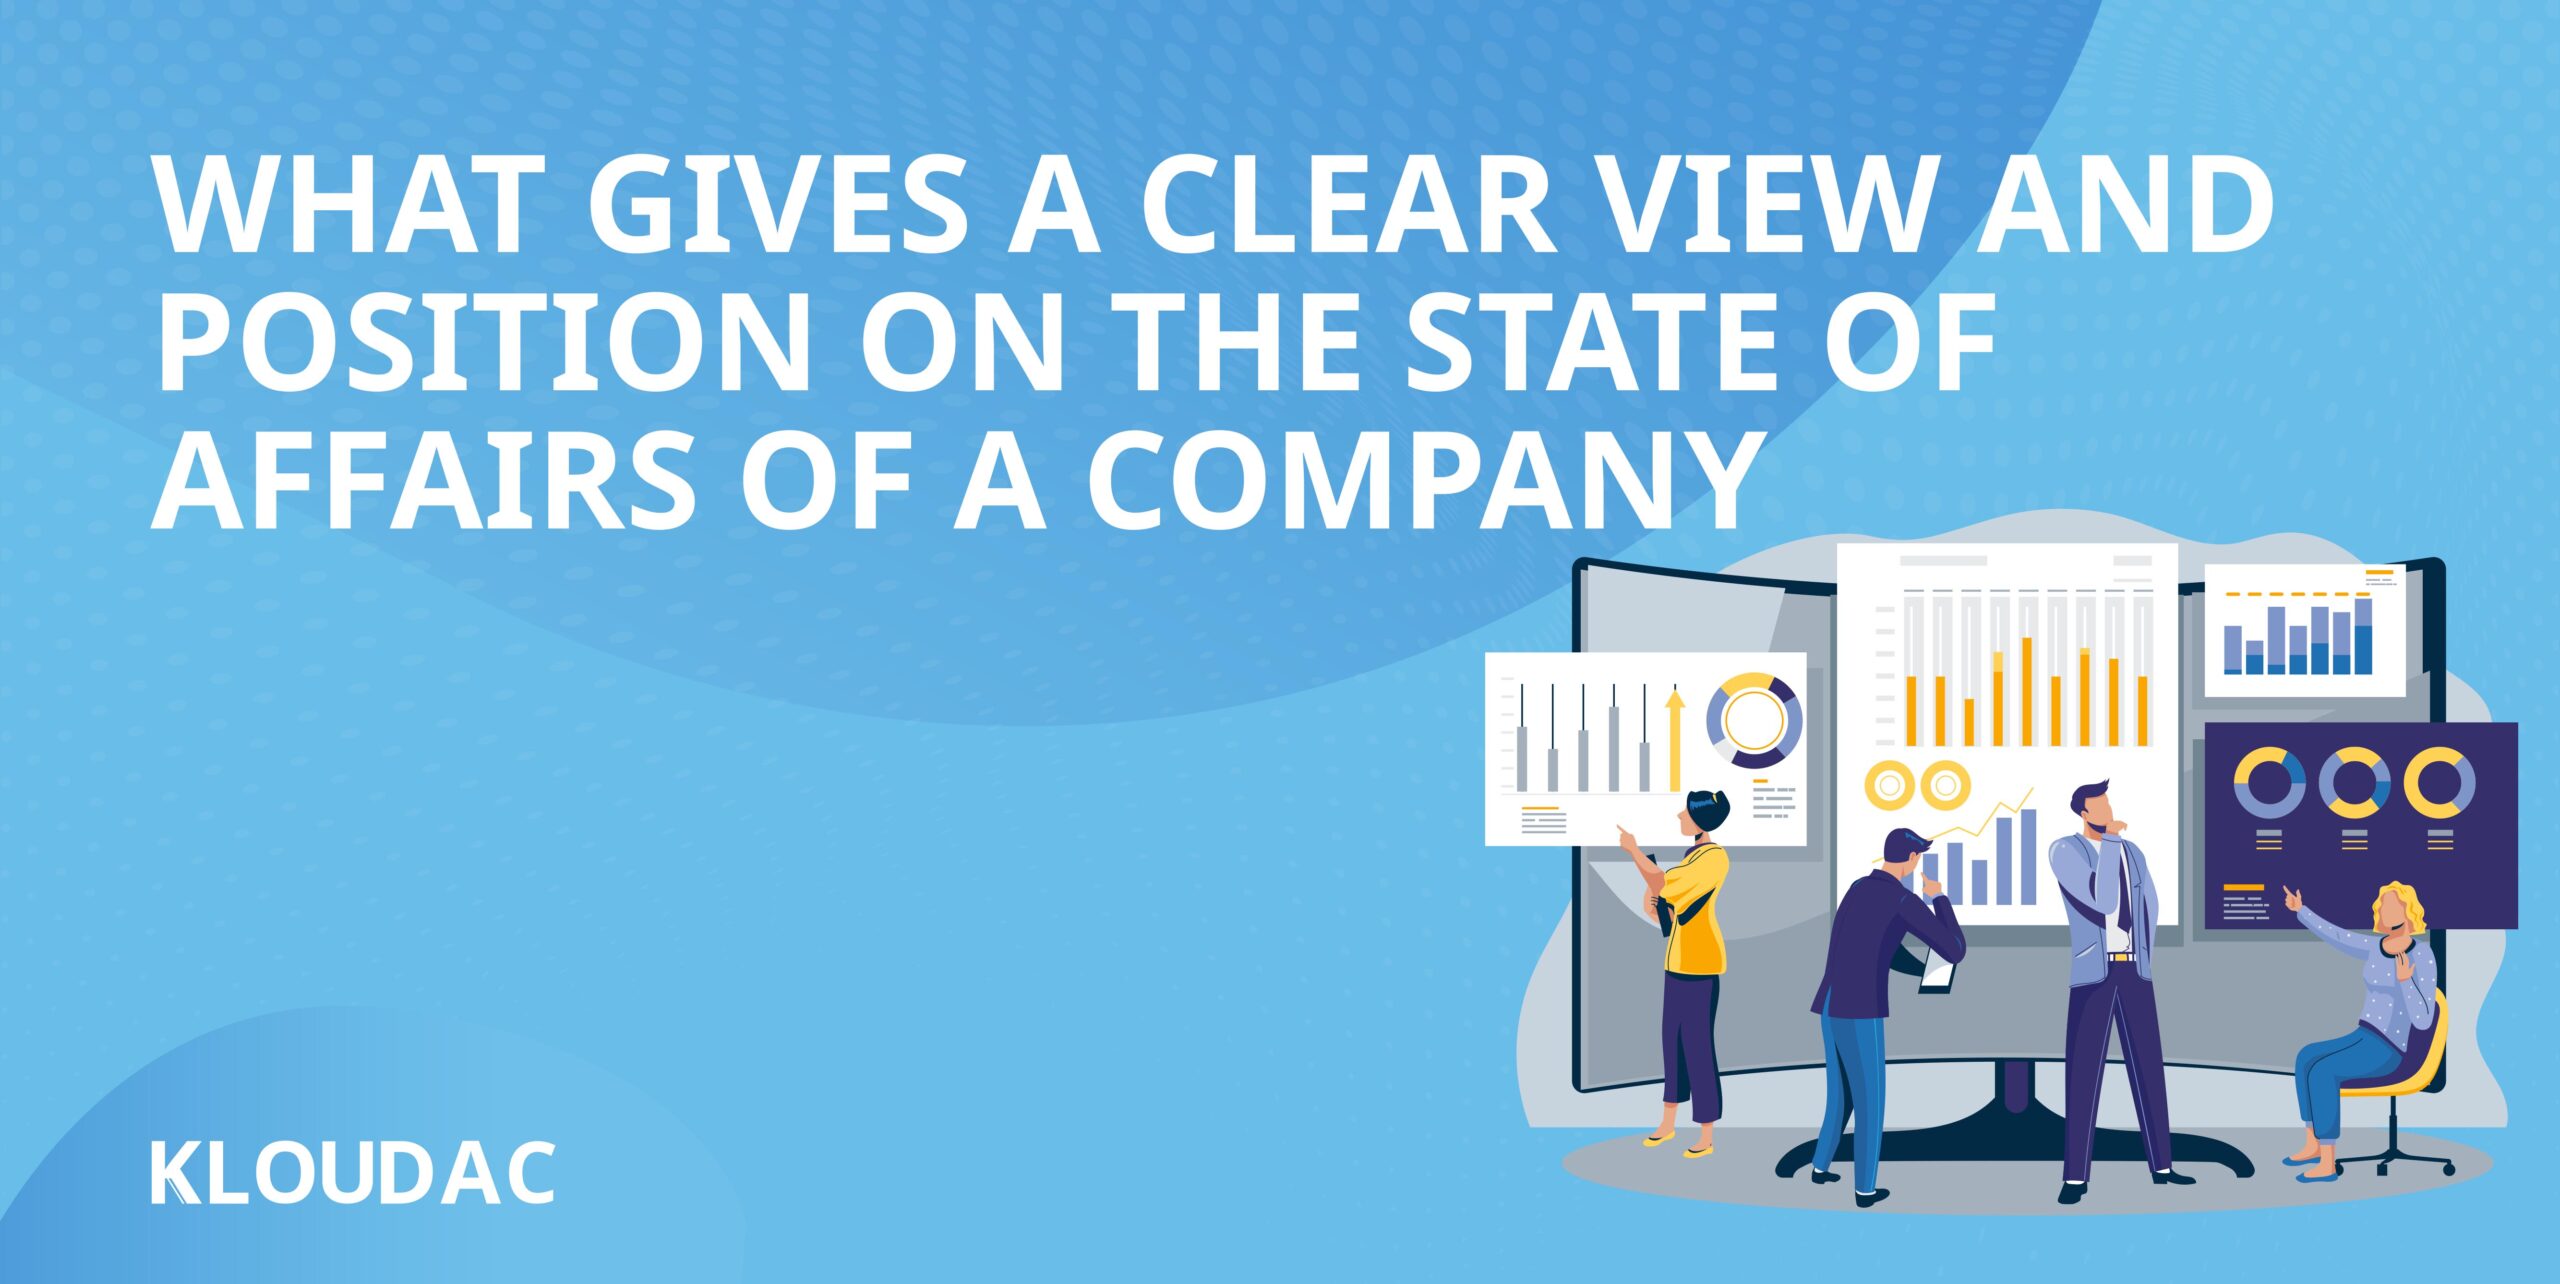 What gives a clear view and position on the state of affairs of a company